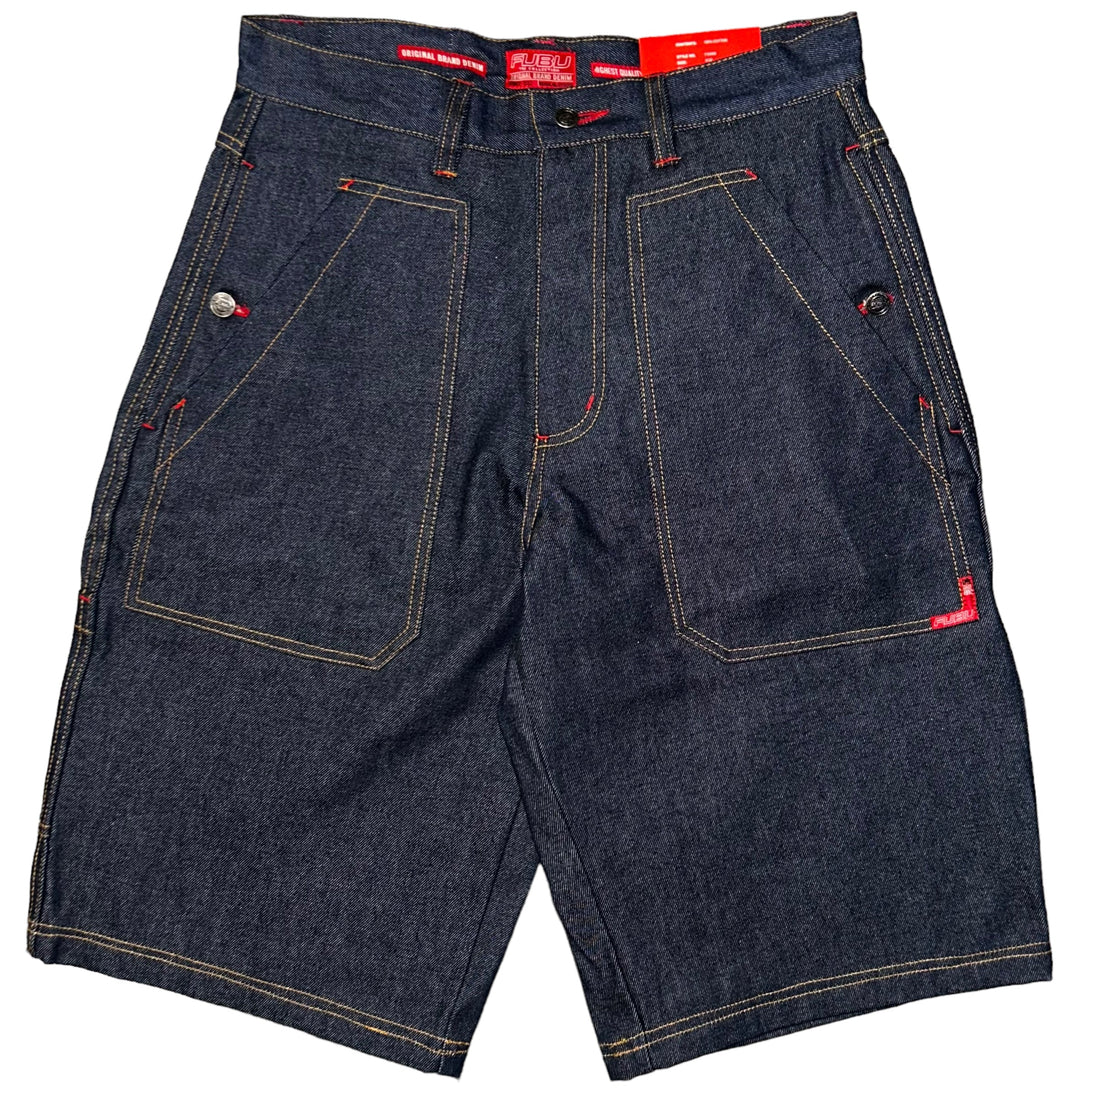 Baggy Shorts FUBU The Collection Vintage (32 USA M) - oldstyleclothing